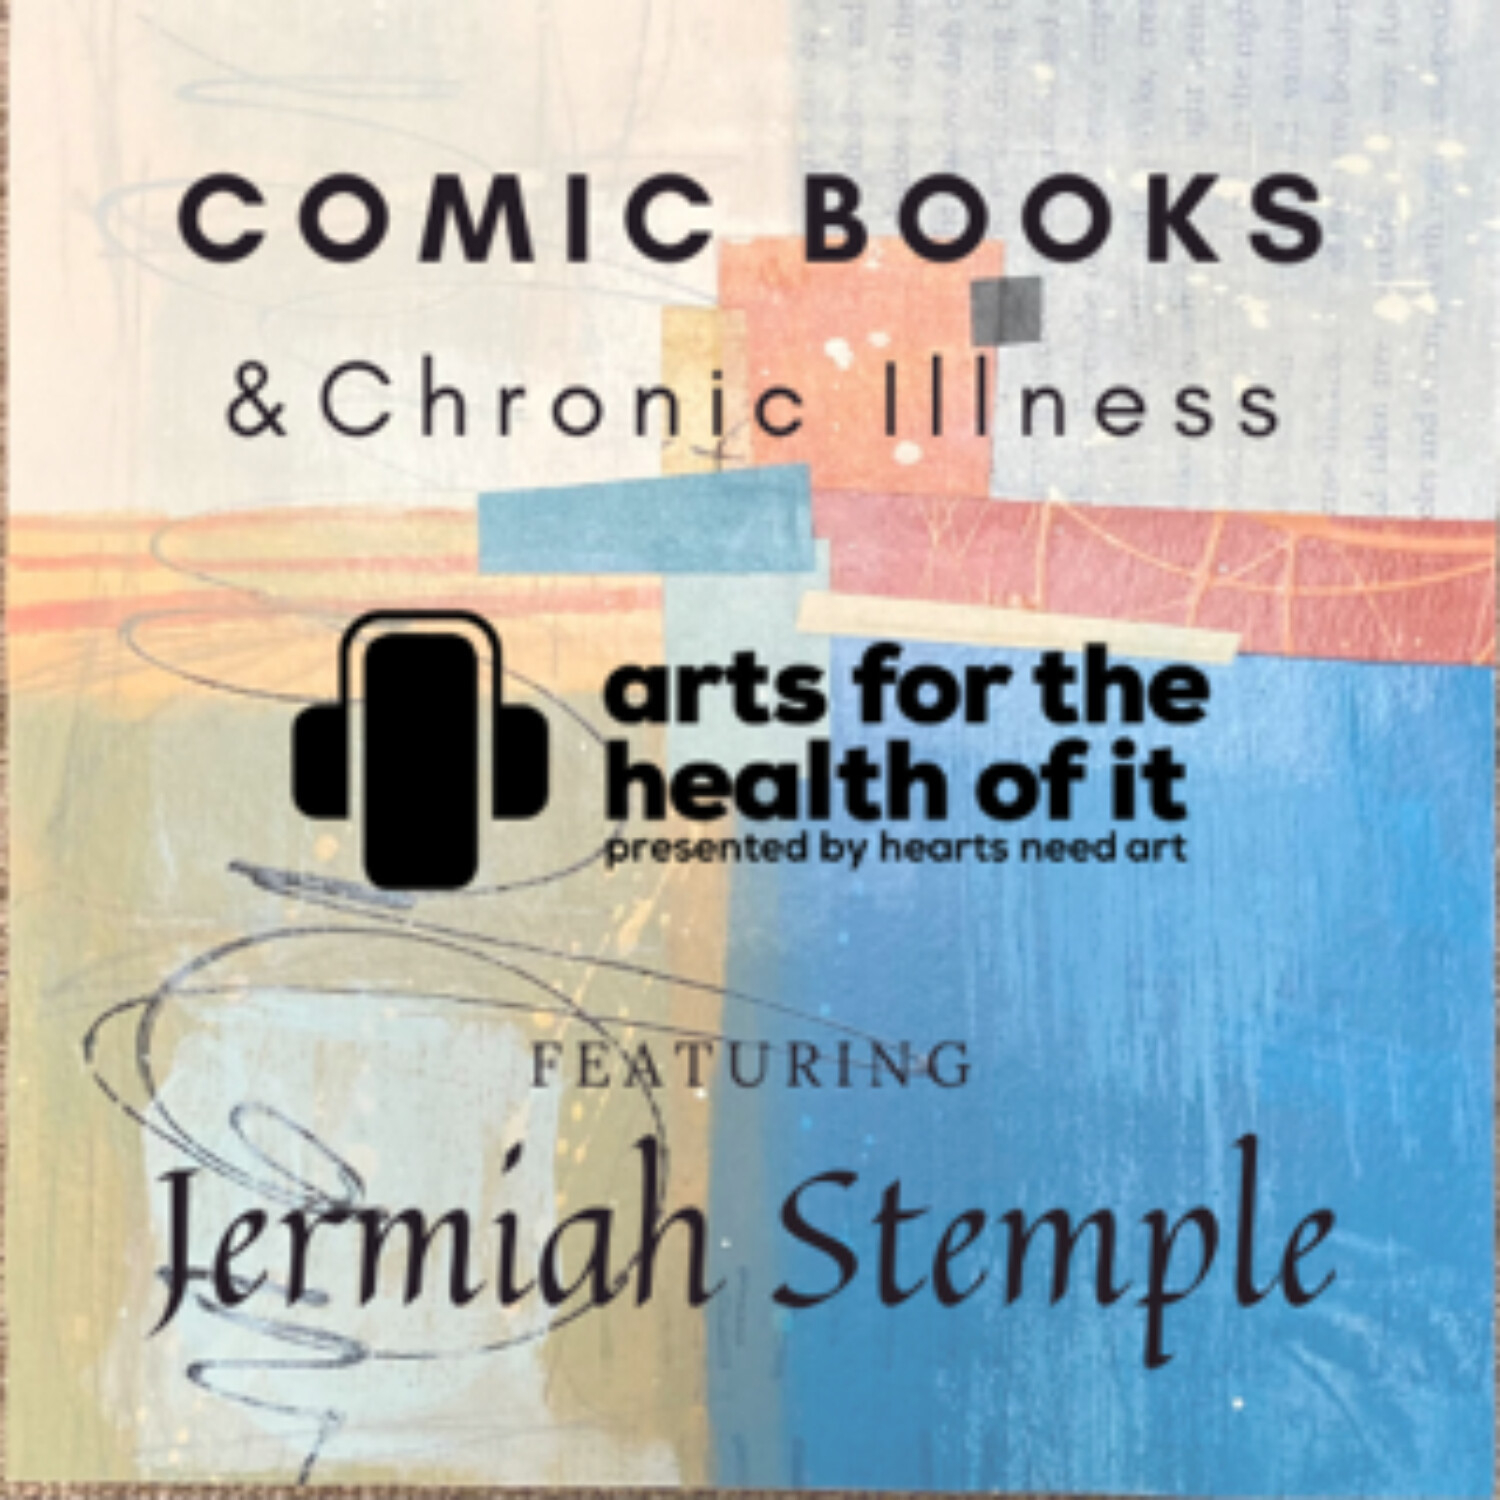 Comic Books And Chronic Disease with Jeremiah Stemple